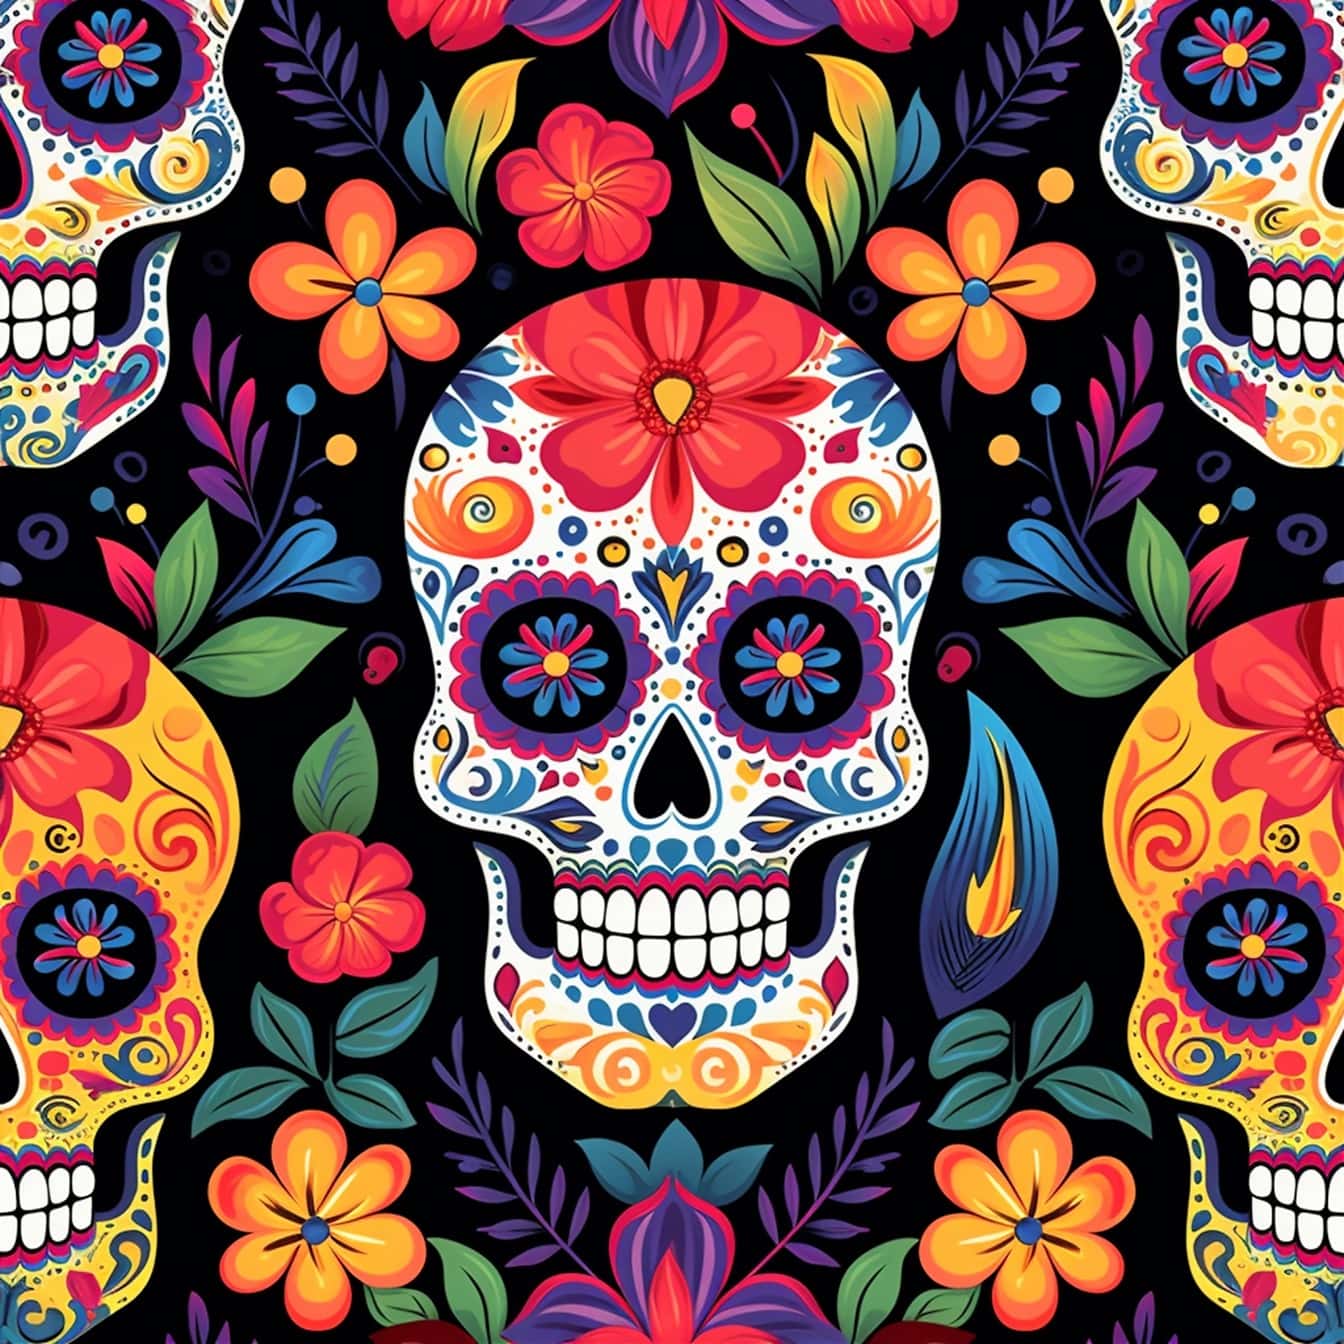 Colorful vector illustration with vintage skull pattern